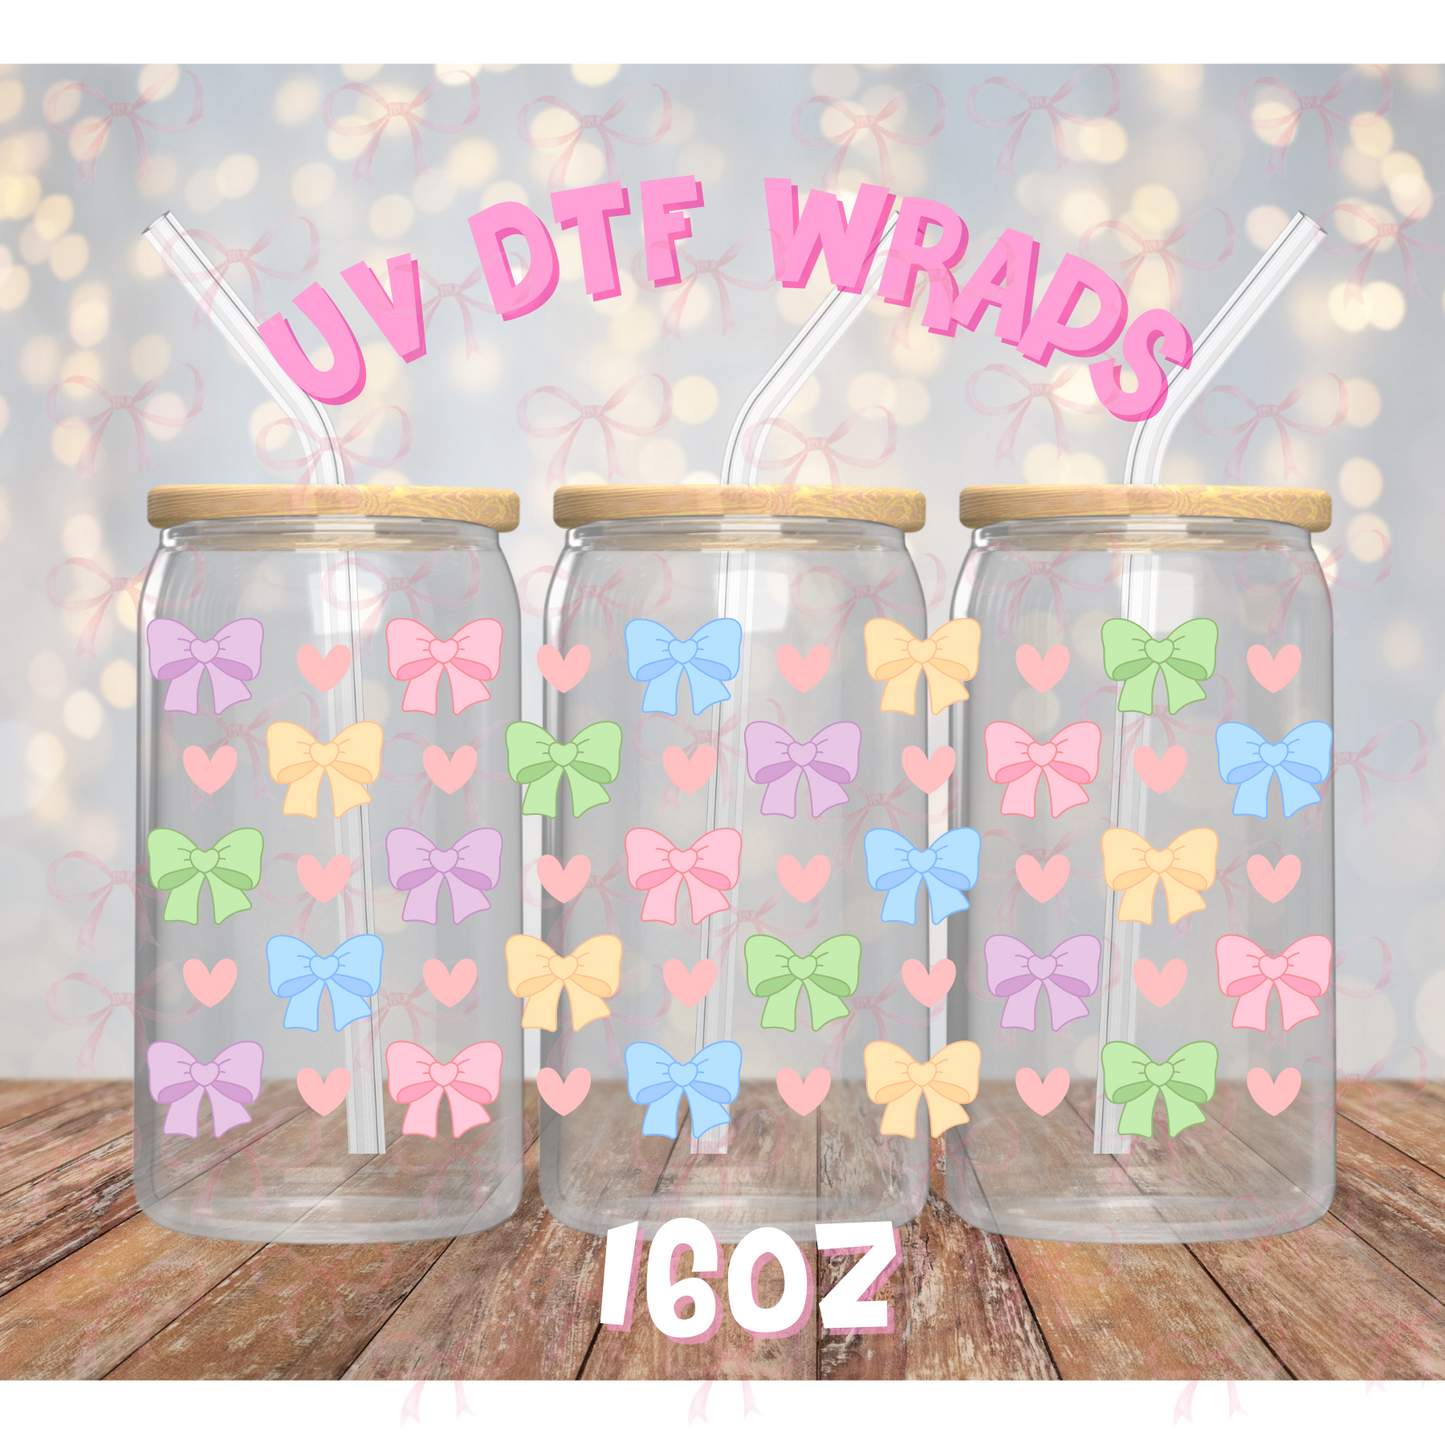 UV DTF WRAP- Cute Bows and Hearts